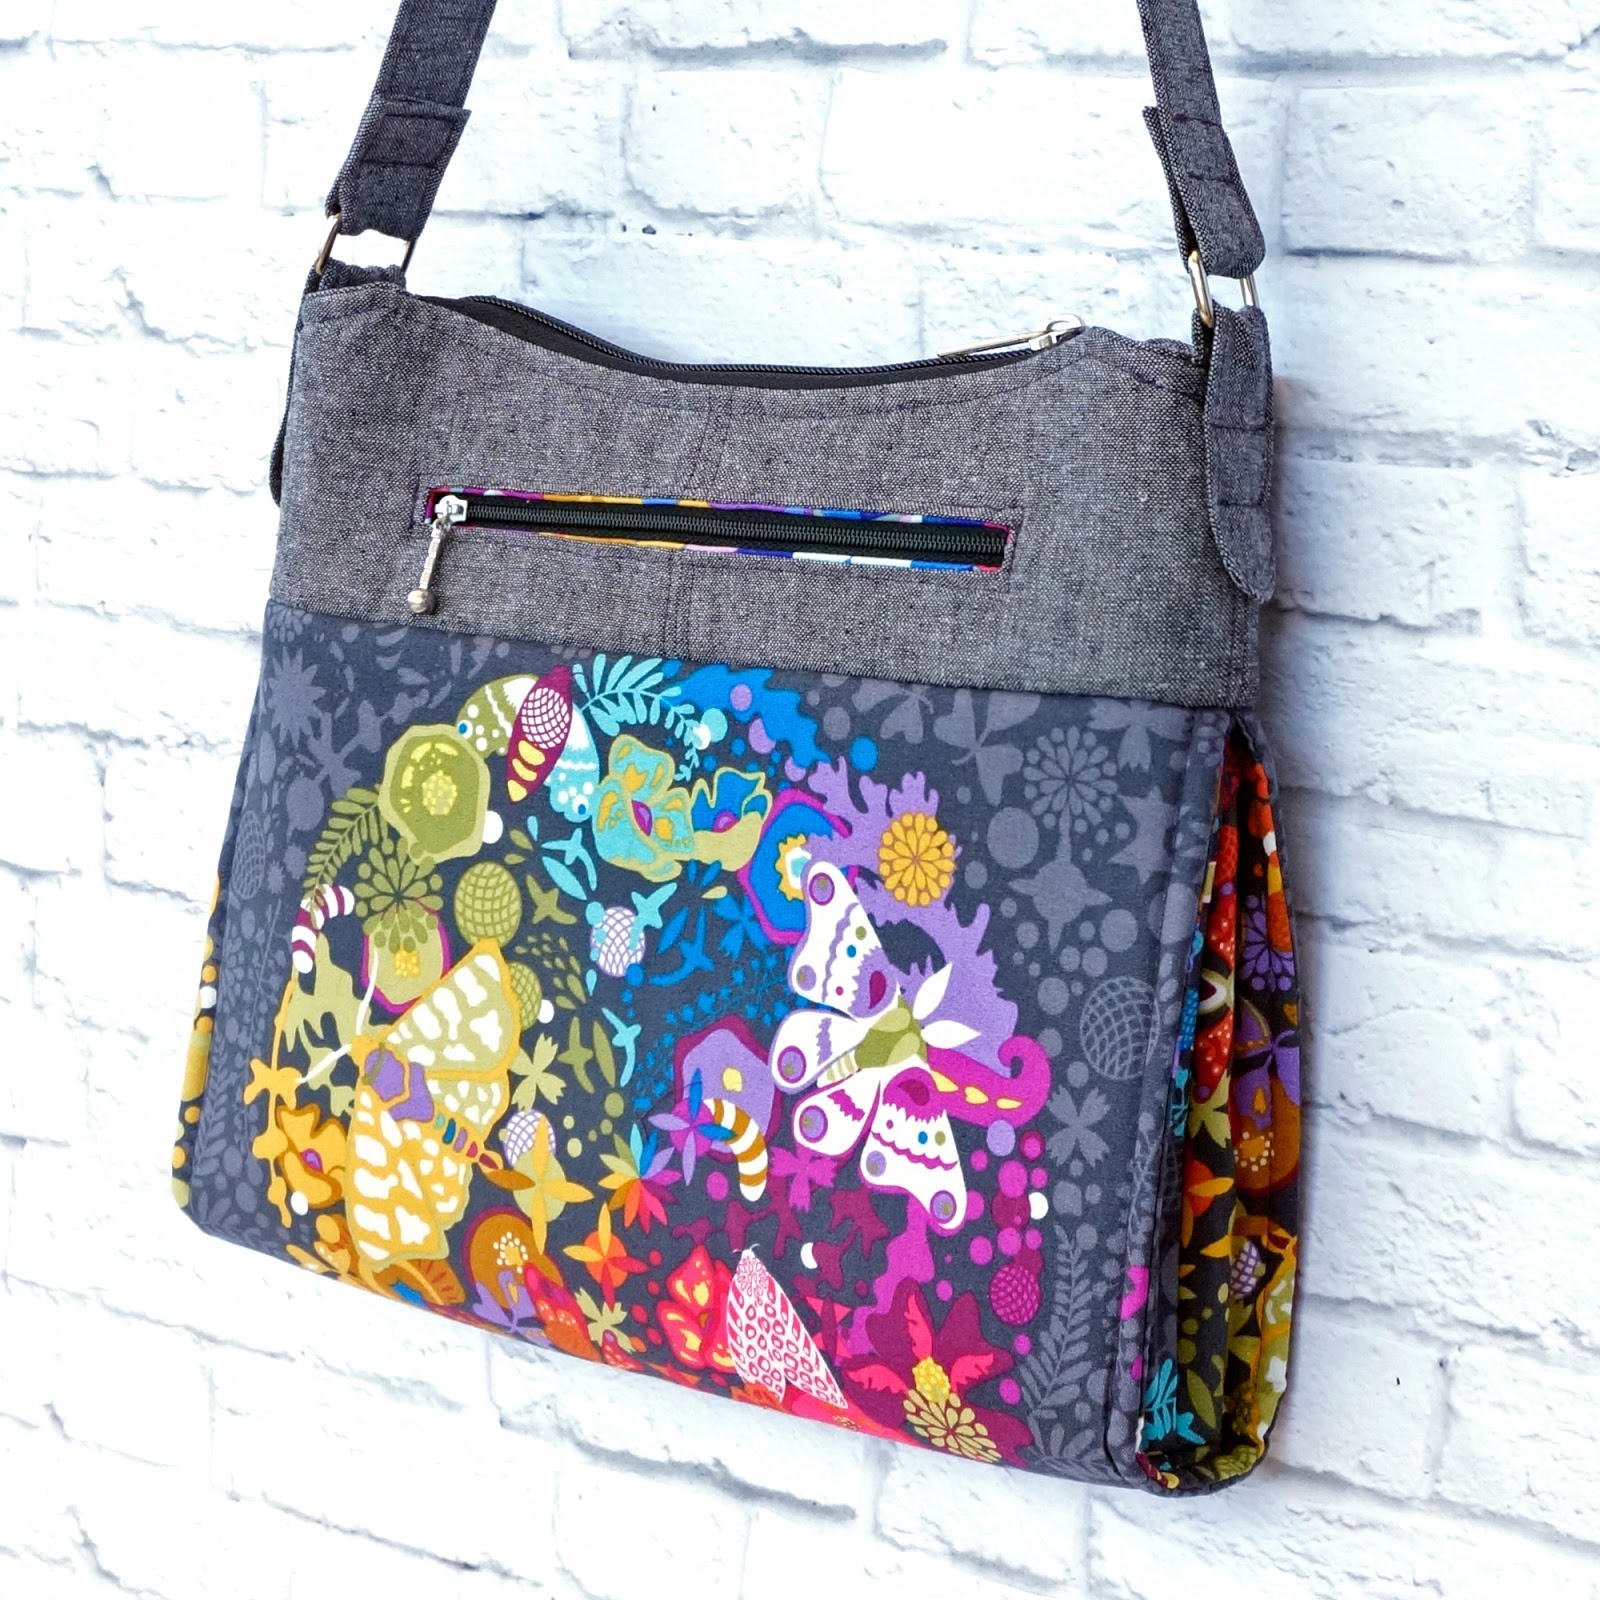 Emmaline Bags: Sewing Patterns and Purse Supplies: The Gabby Bag Sewing Pattern - Publicly Released!